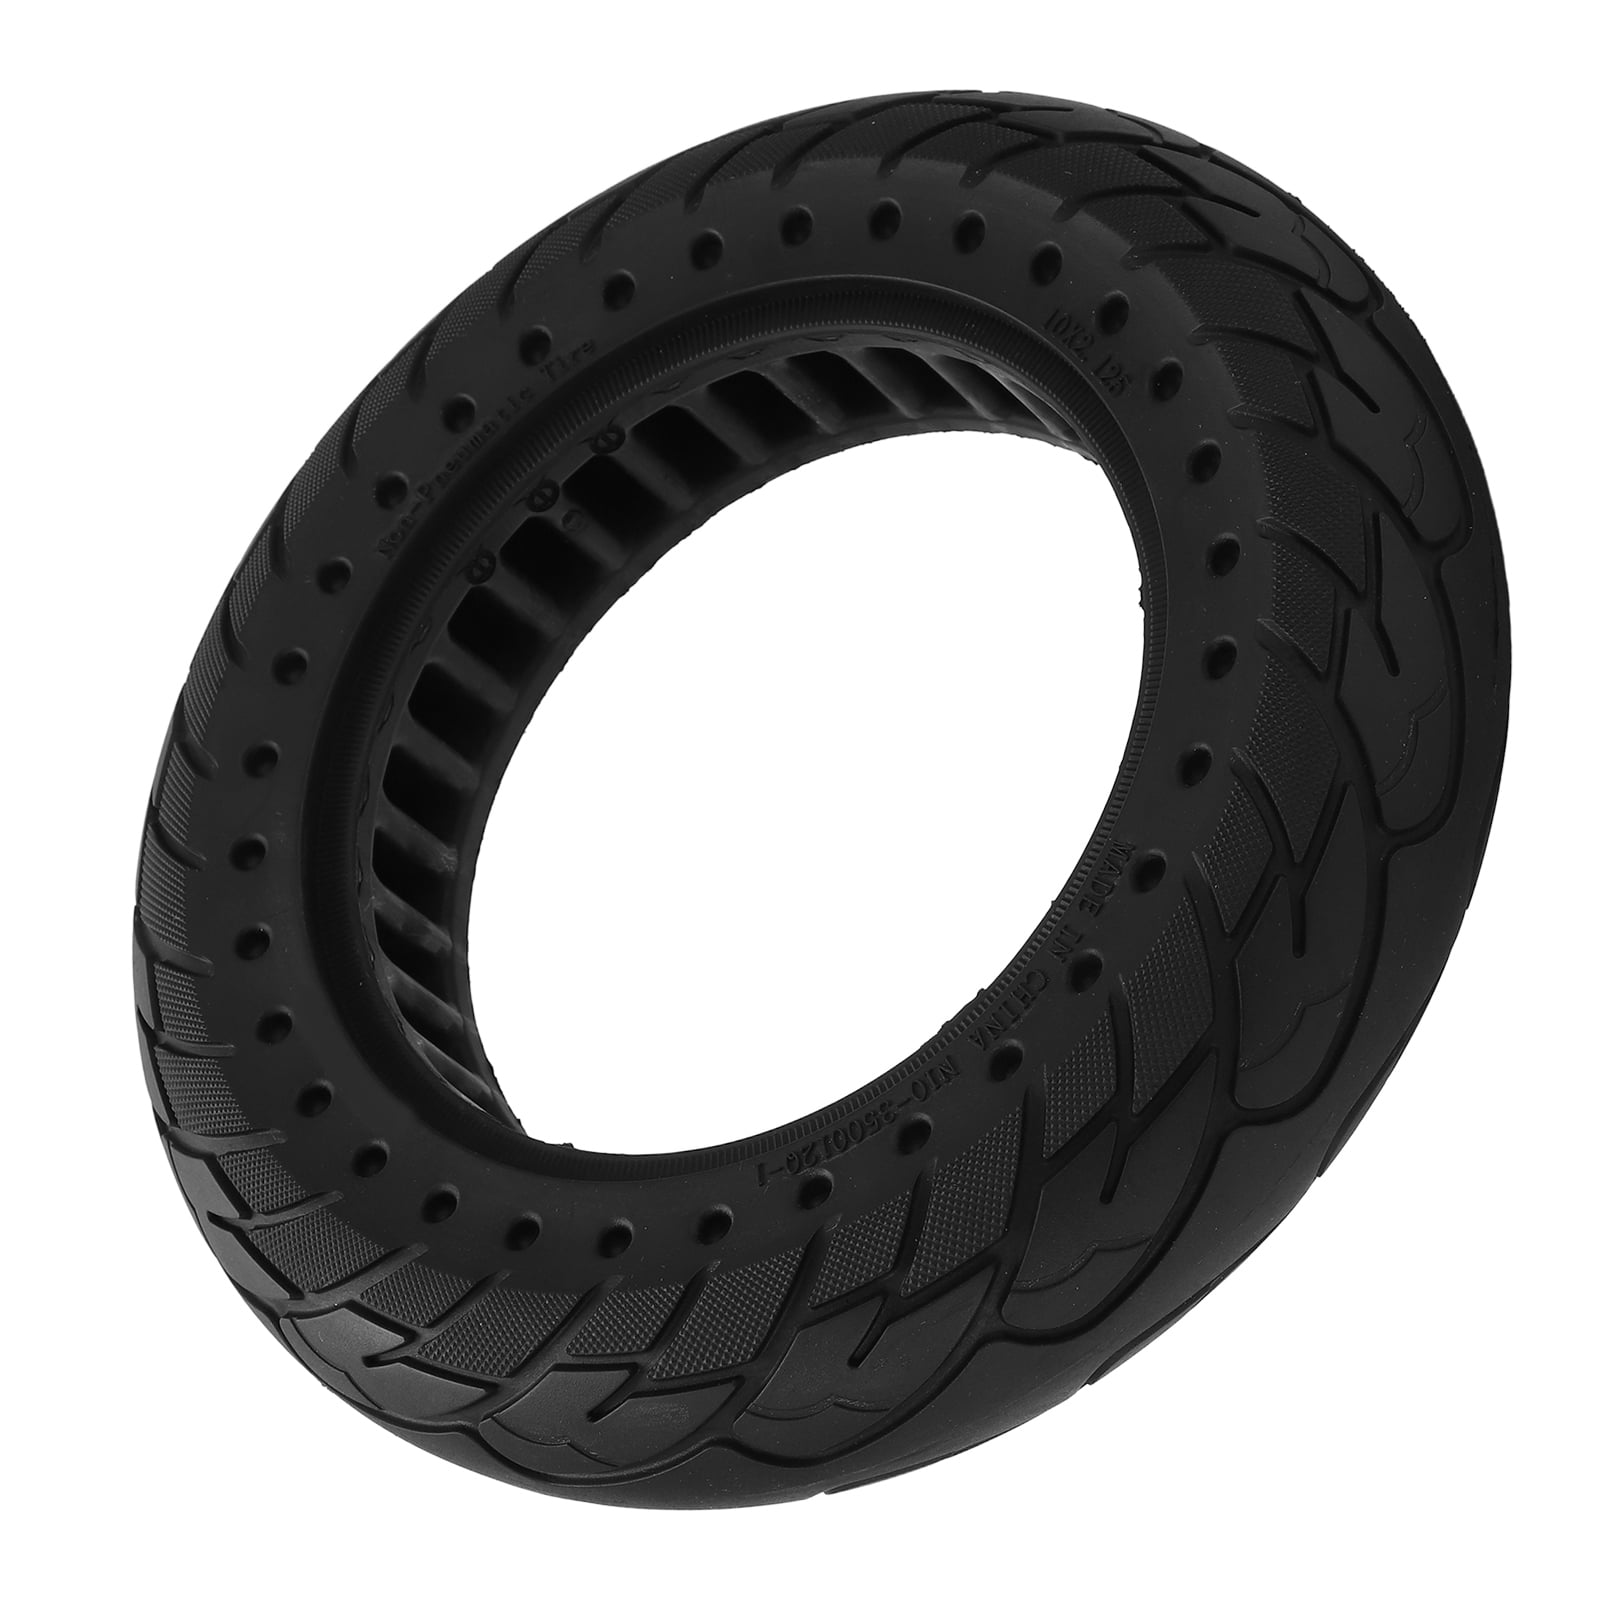 LYUMO 10x2.0 Tire For Electric Scooter,10 Inch 10x2.0 Rubber Tire